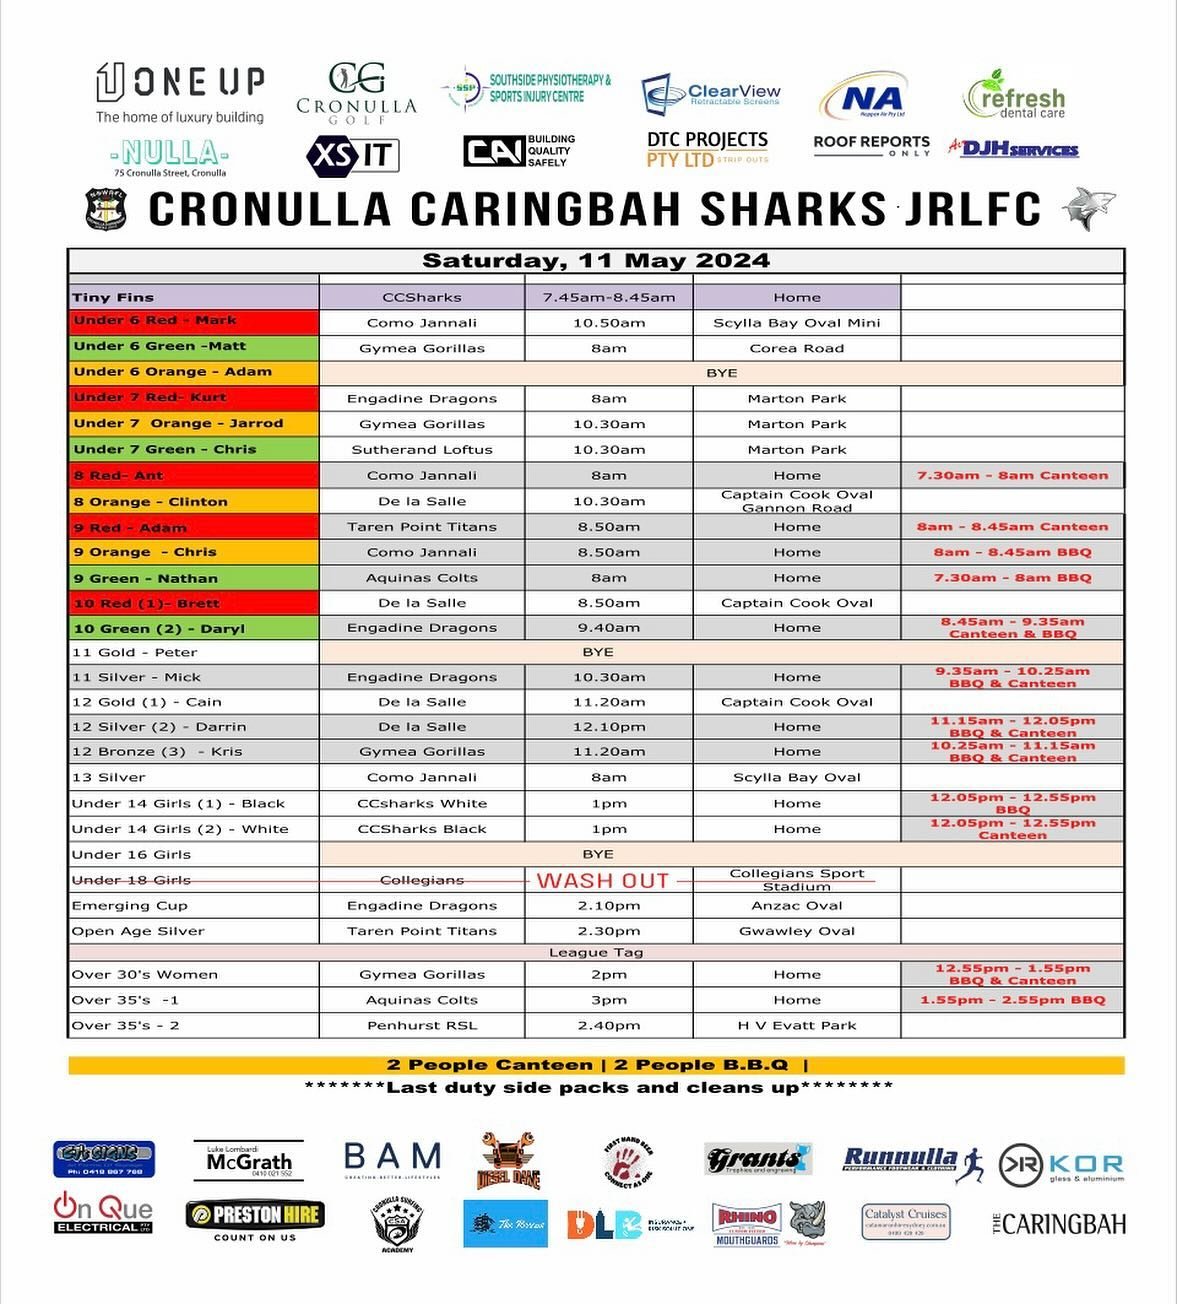 ⚫️⚪️ ROUND 3 DRAW ⚫️⚪️ Good luck to all teams. Home teams please note duty times. #ccsharks 🤞🏻